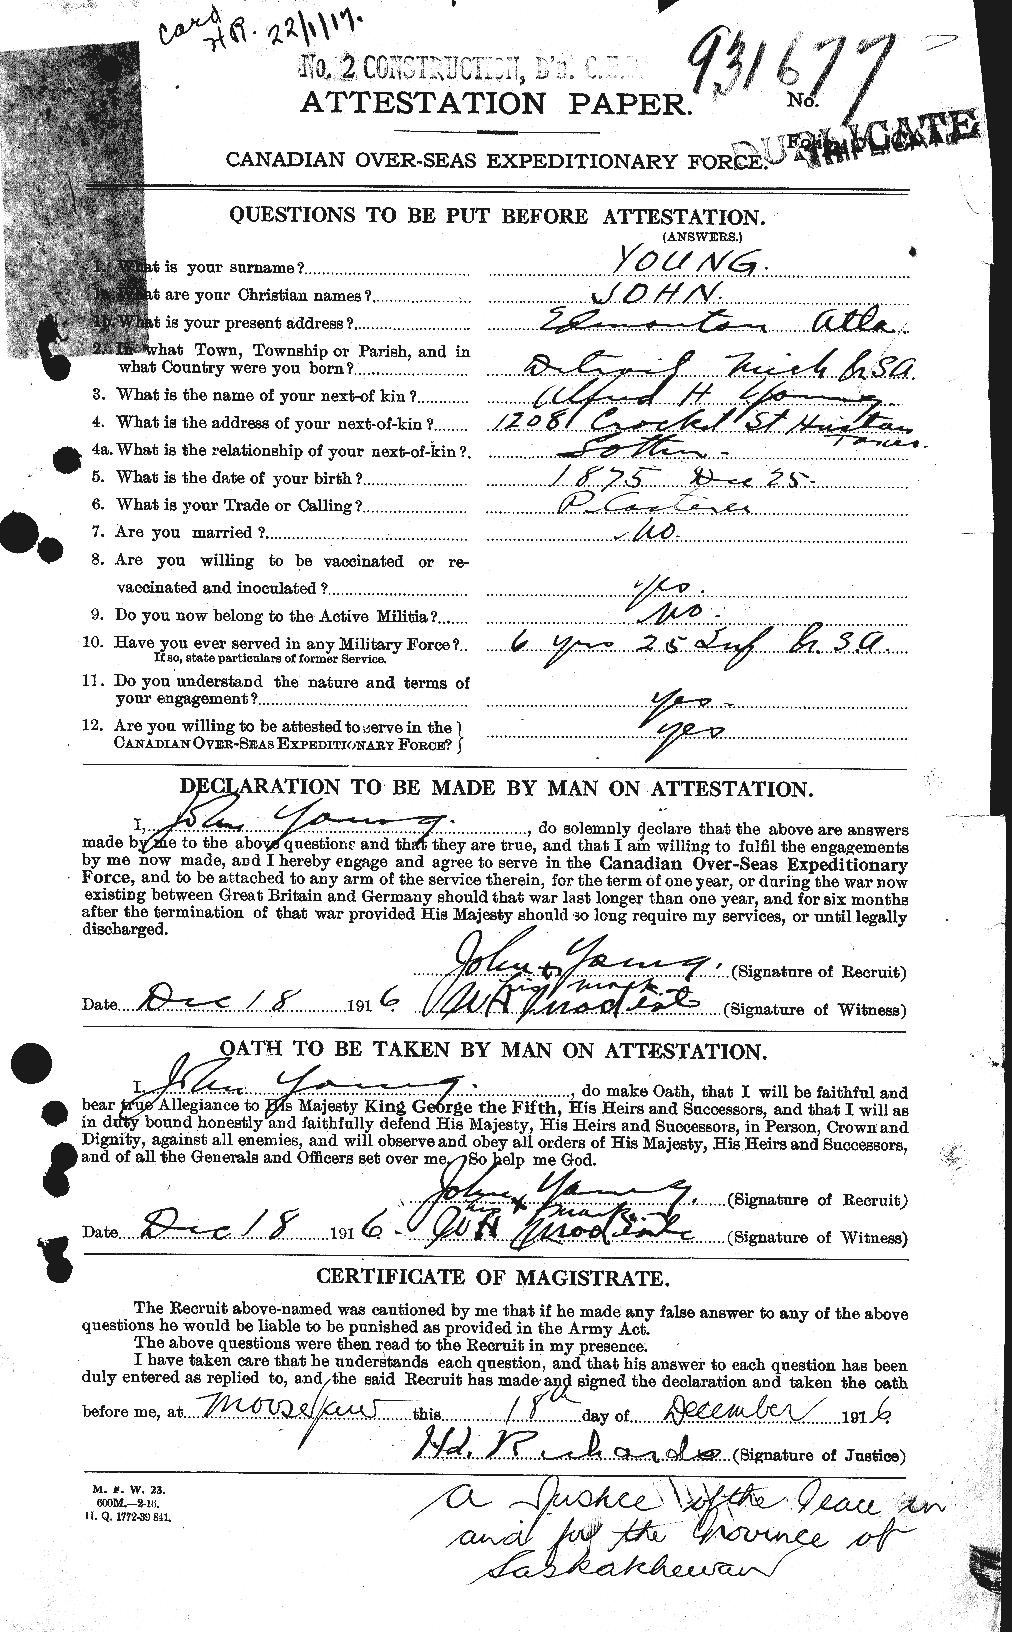 Personnel Records of the First World War - CEF 690721a